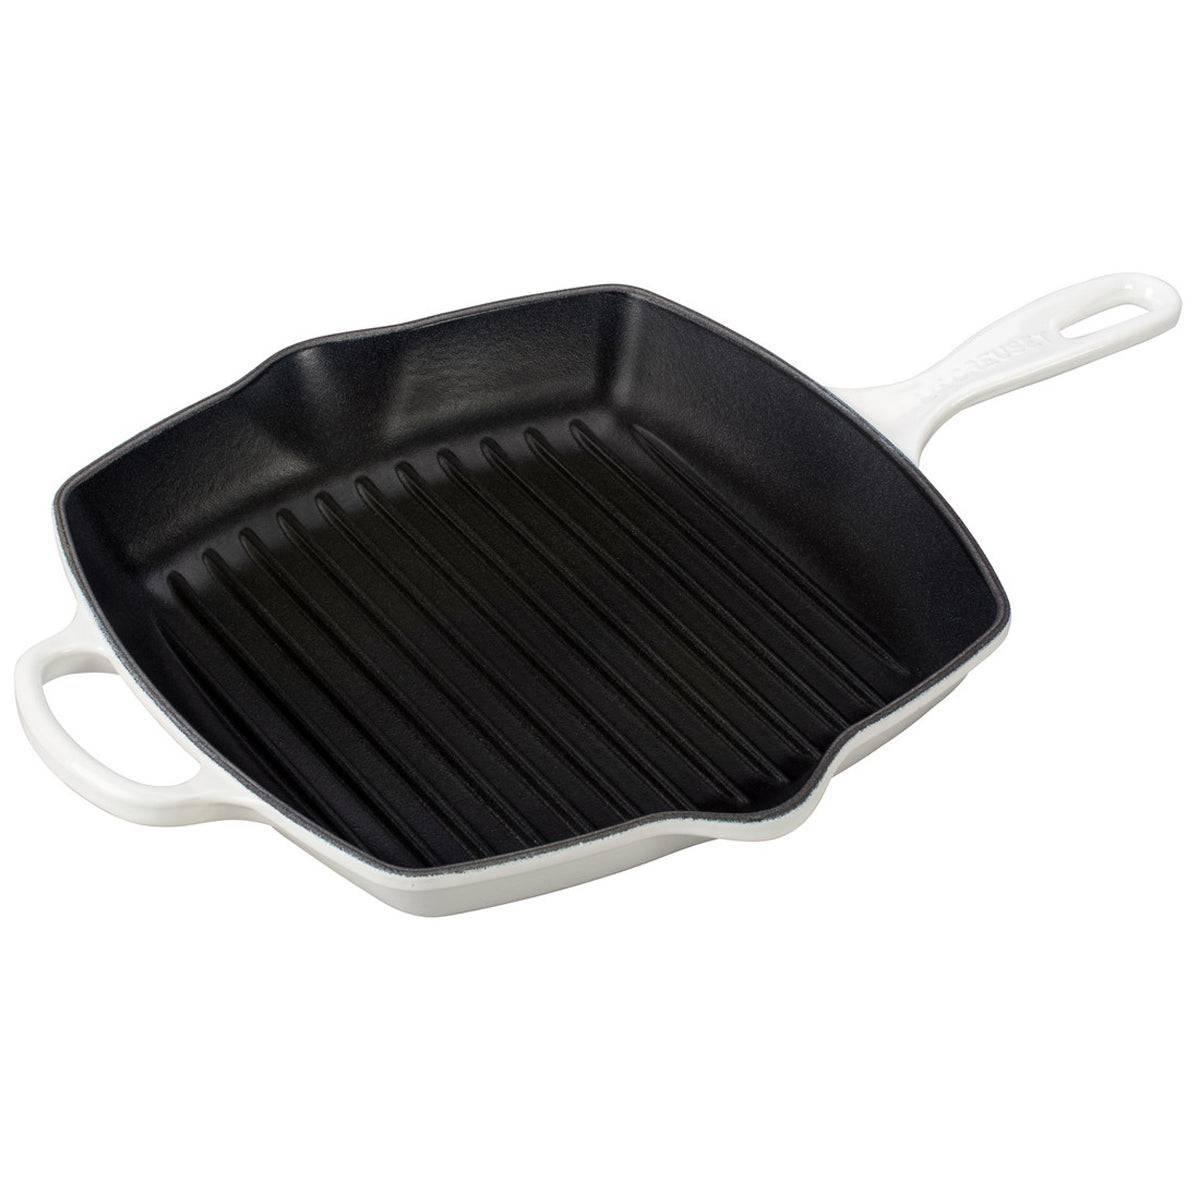 Le Creuset Signature Enameled Cast Iron Square Skillet Grill, 10.25-Inches, White - Kitchen Universe